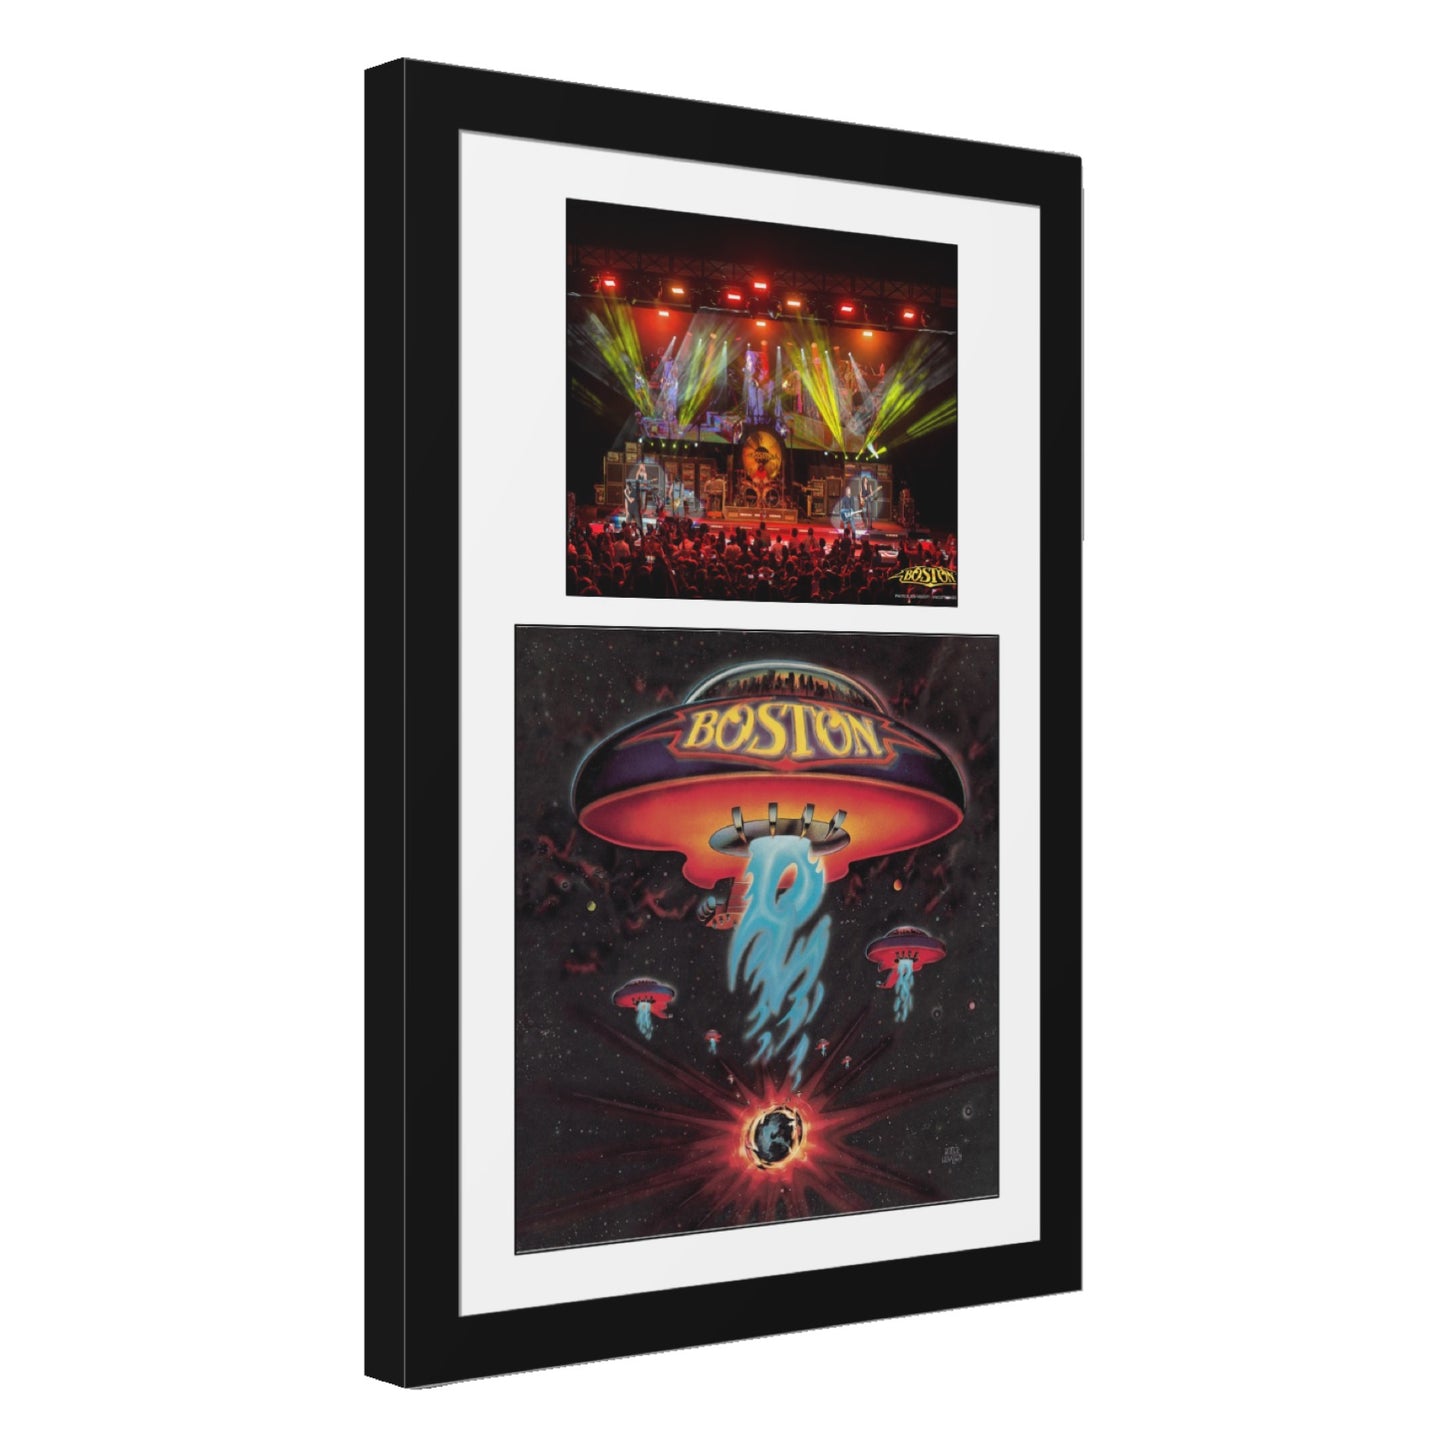 12" Album Cover Photo Holds 8x10 in a 16x24 Frame